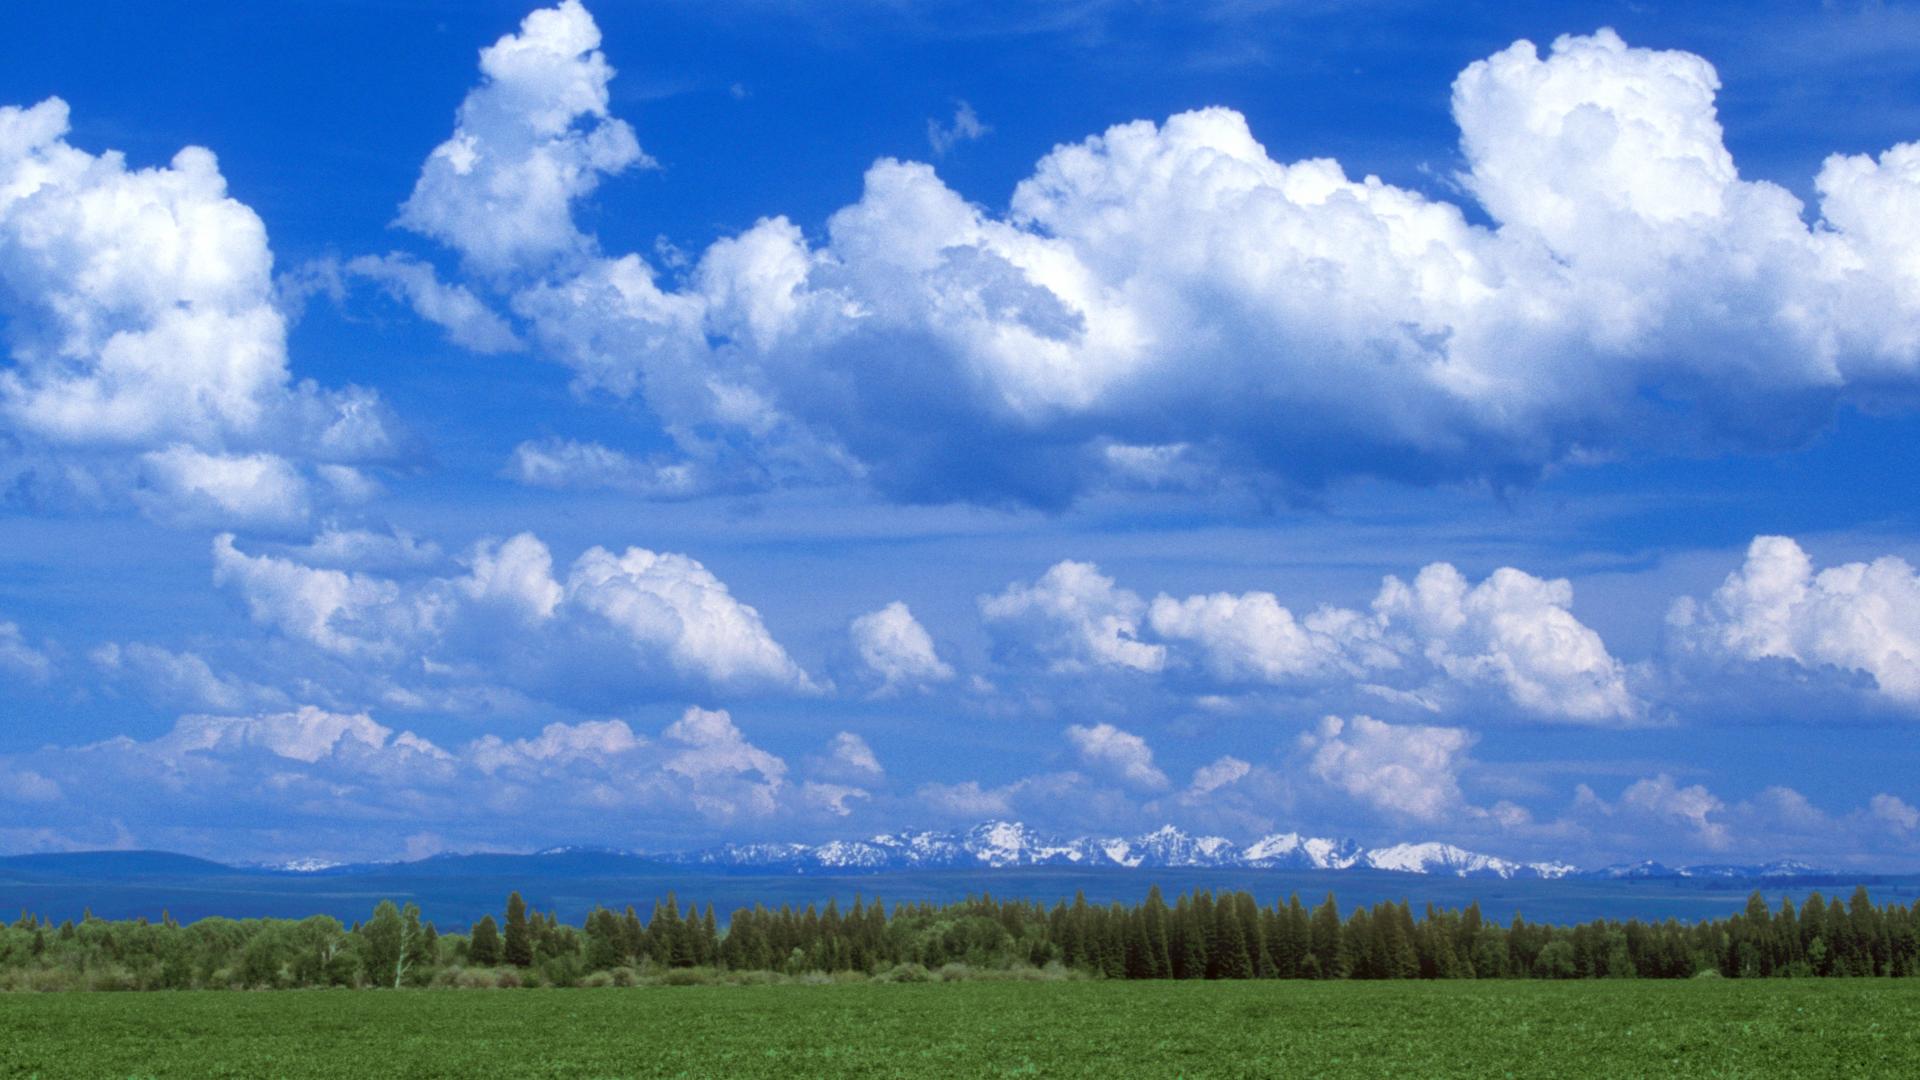  Backgrounds Oregon Background Joseph Partly Sky Cloudy HD wallpapers 1920x1080